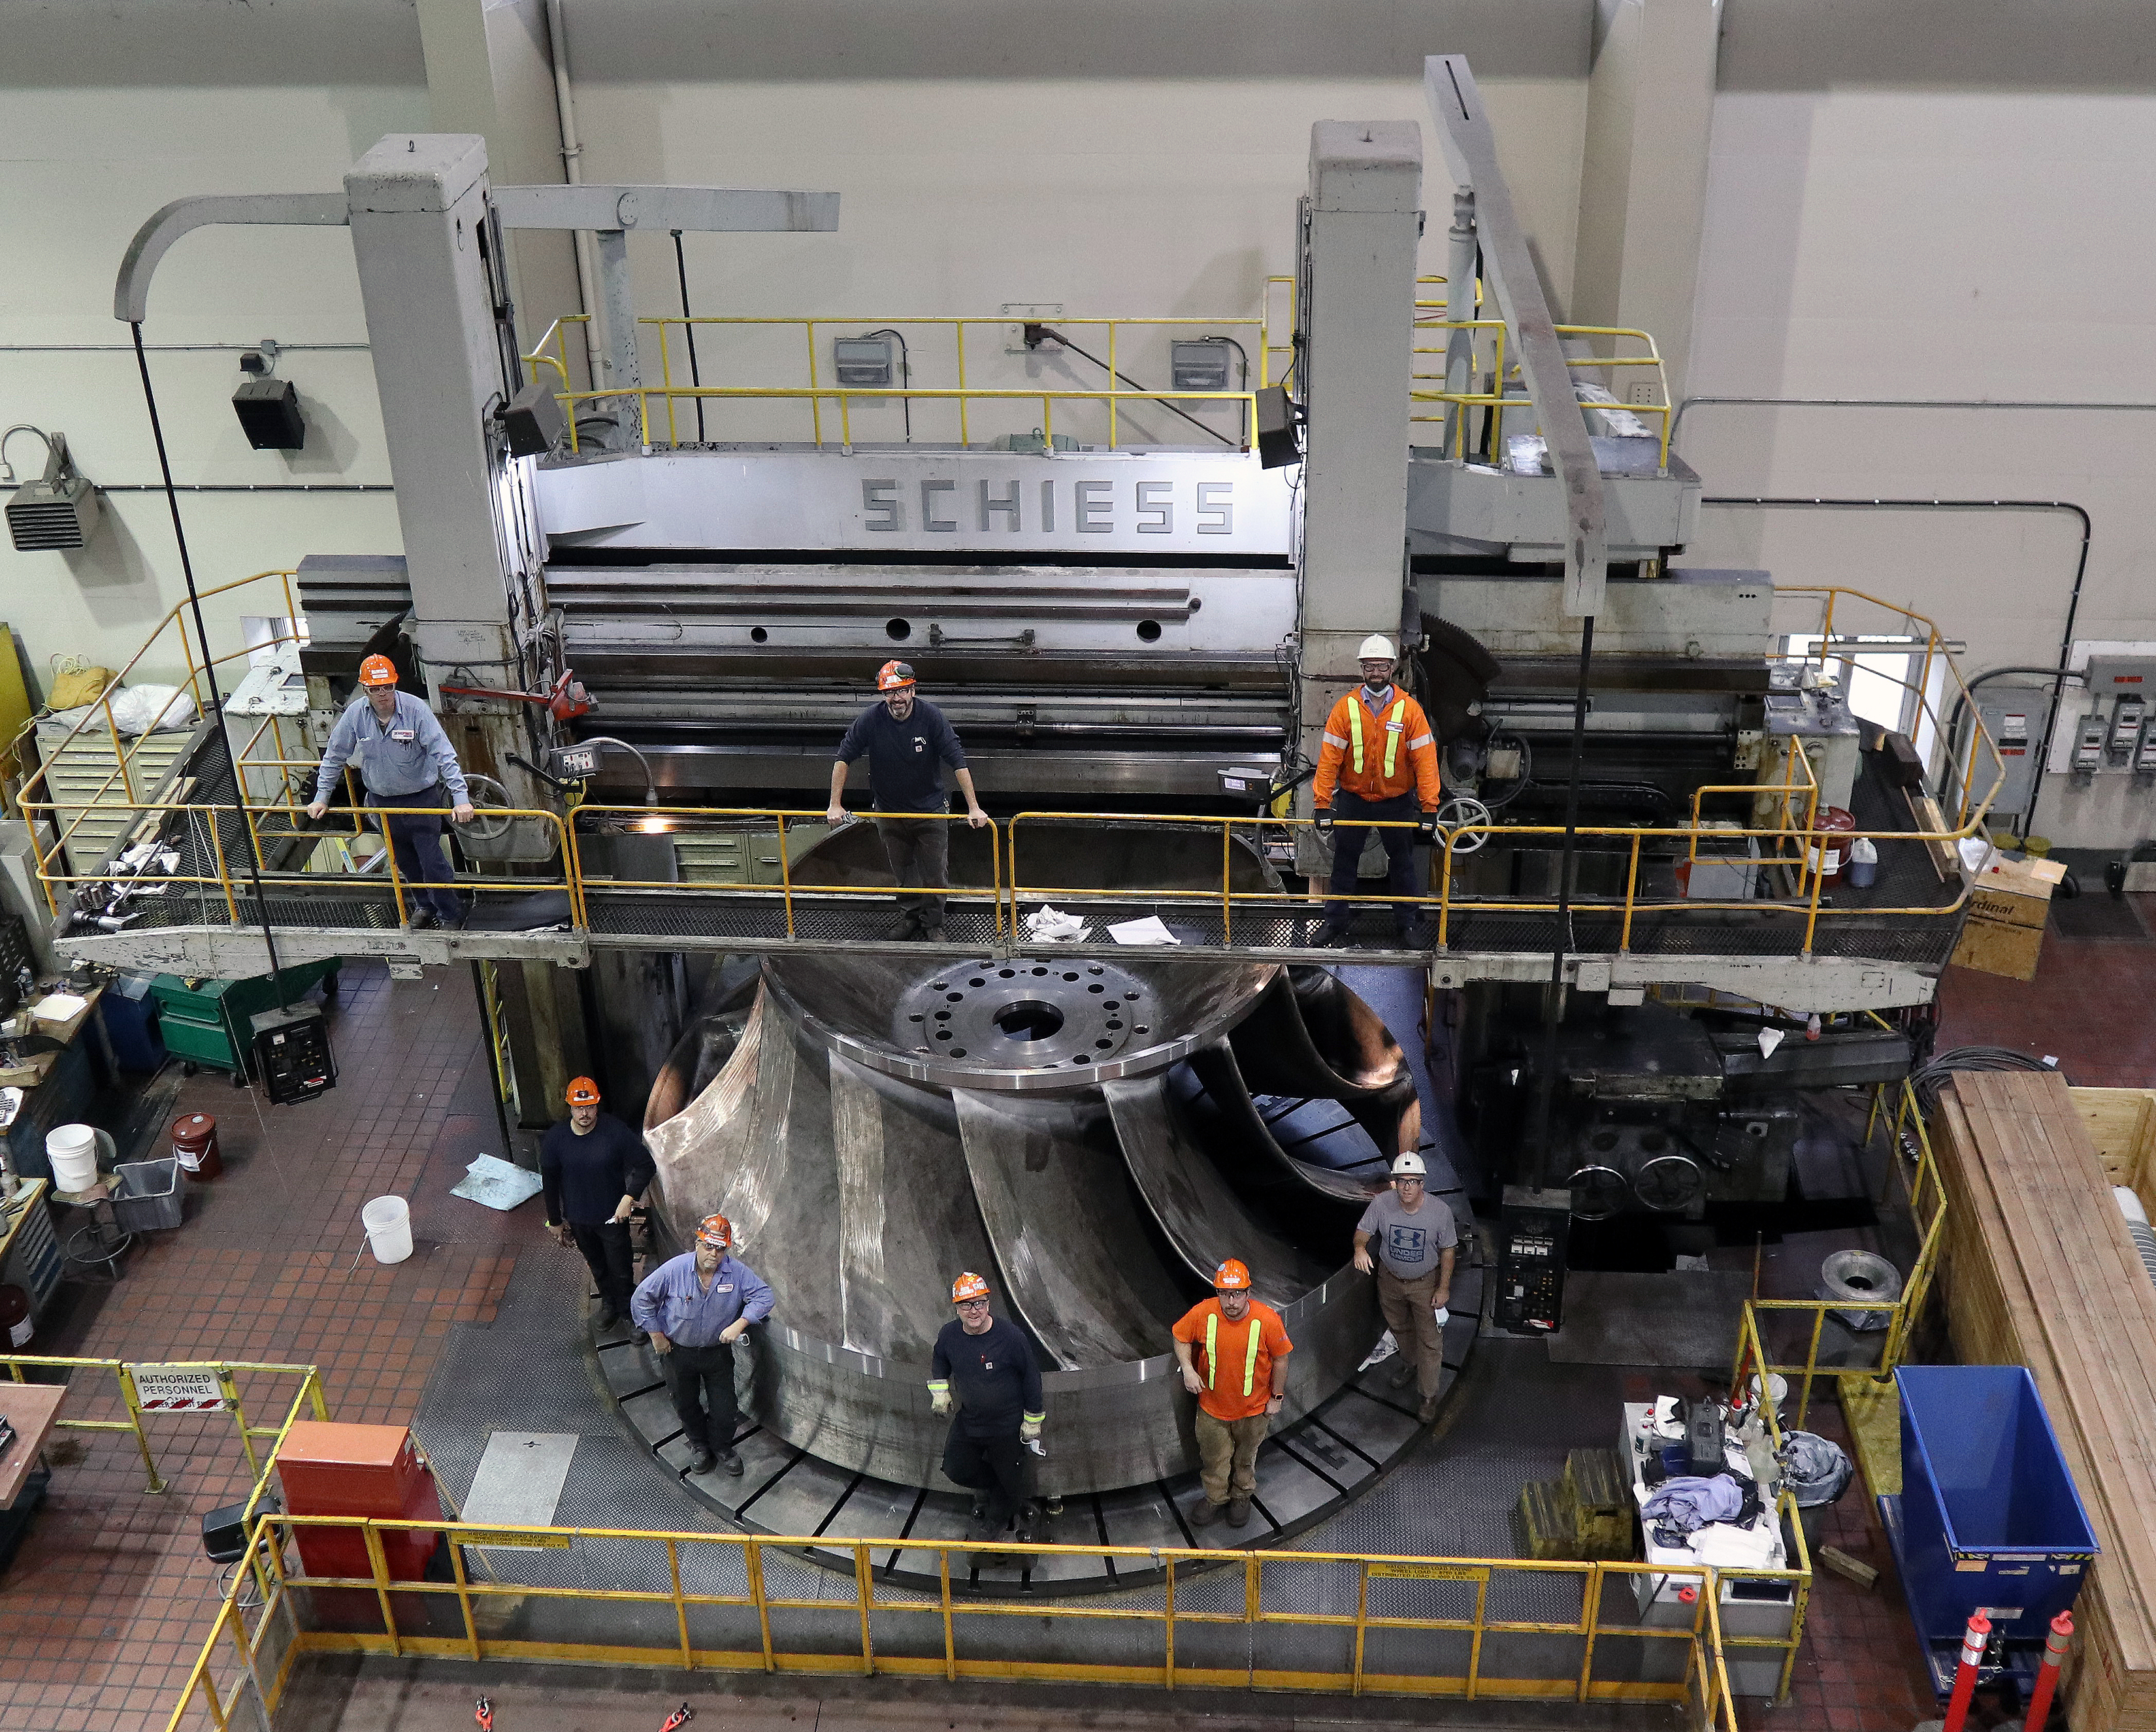 The Otto Holden overhaul project is leveraging expertise across OPG, including the Niagara Falls work centre. Its complex machining equipment helped complete repairs on the Unit 7 runner.